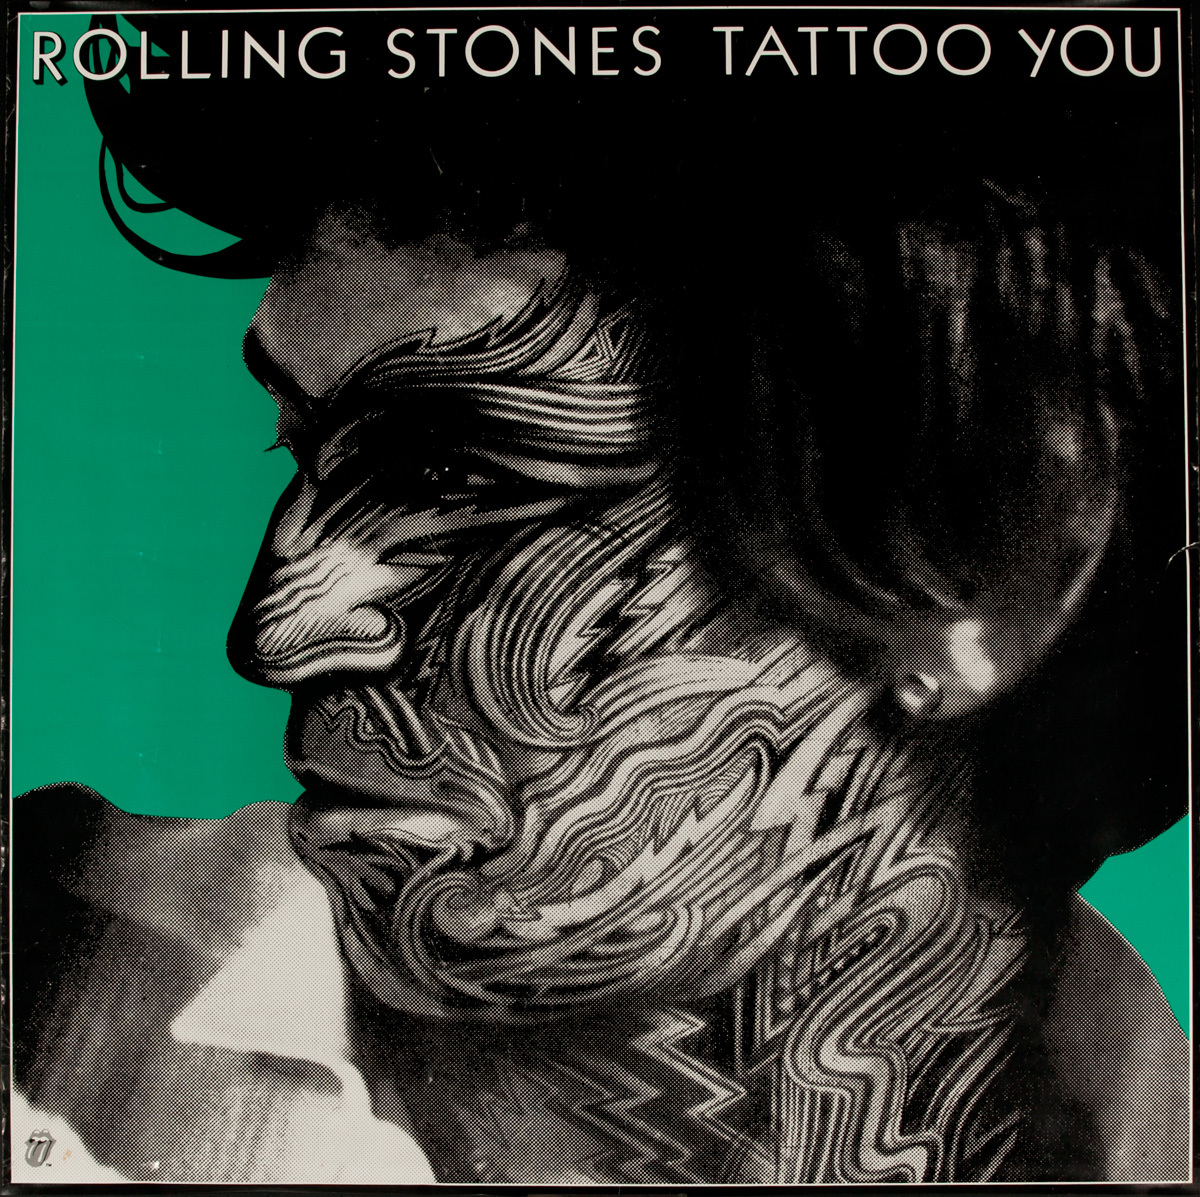 Rolling Stones Tattoo You Original Music Store Display Poster, Keith Richards